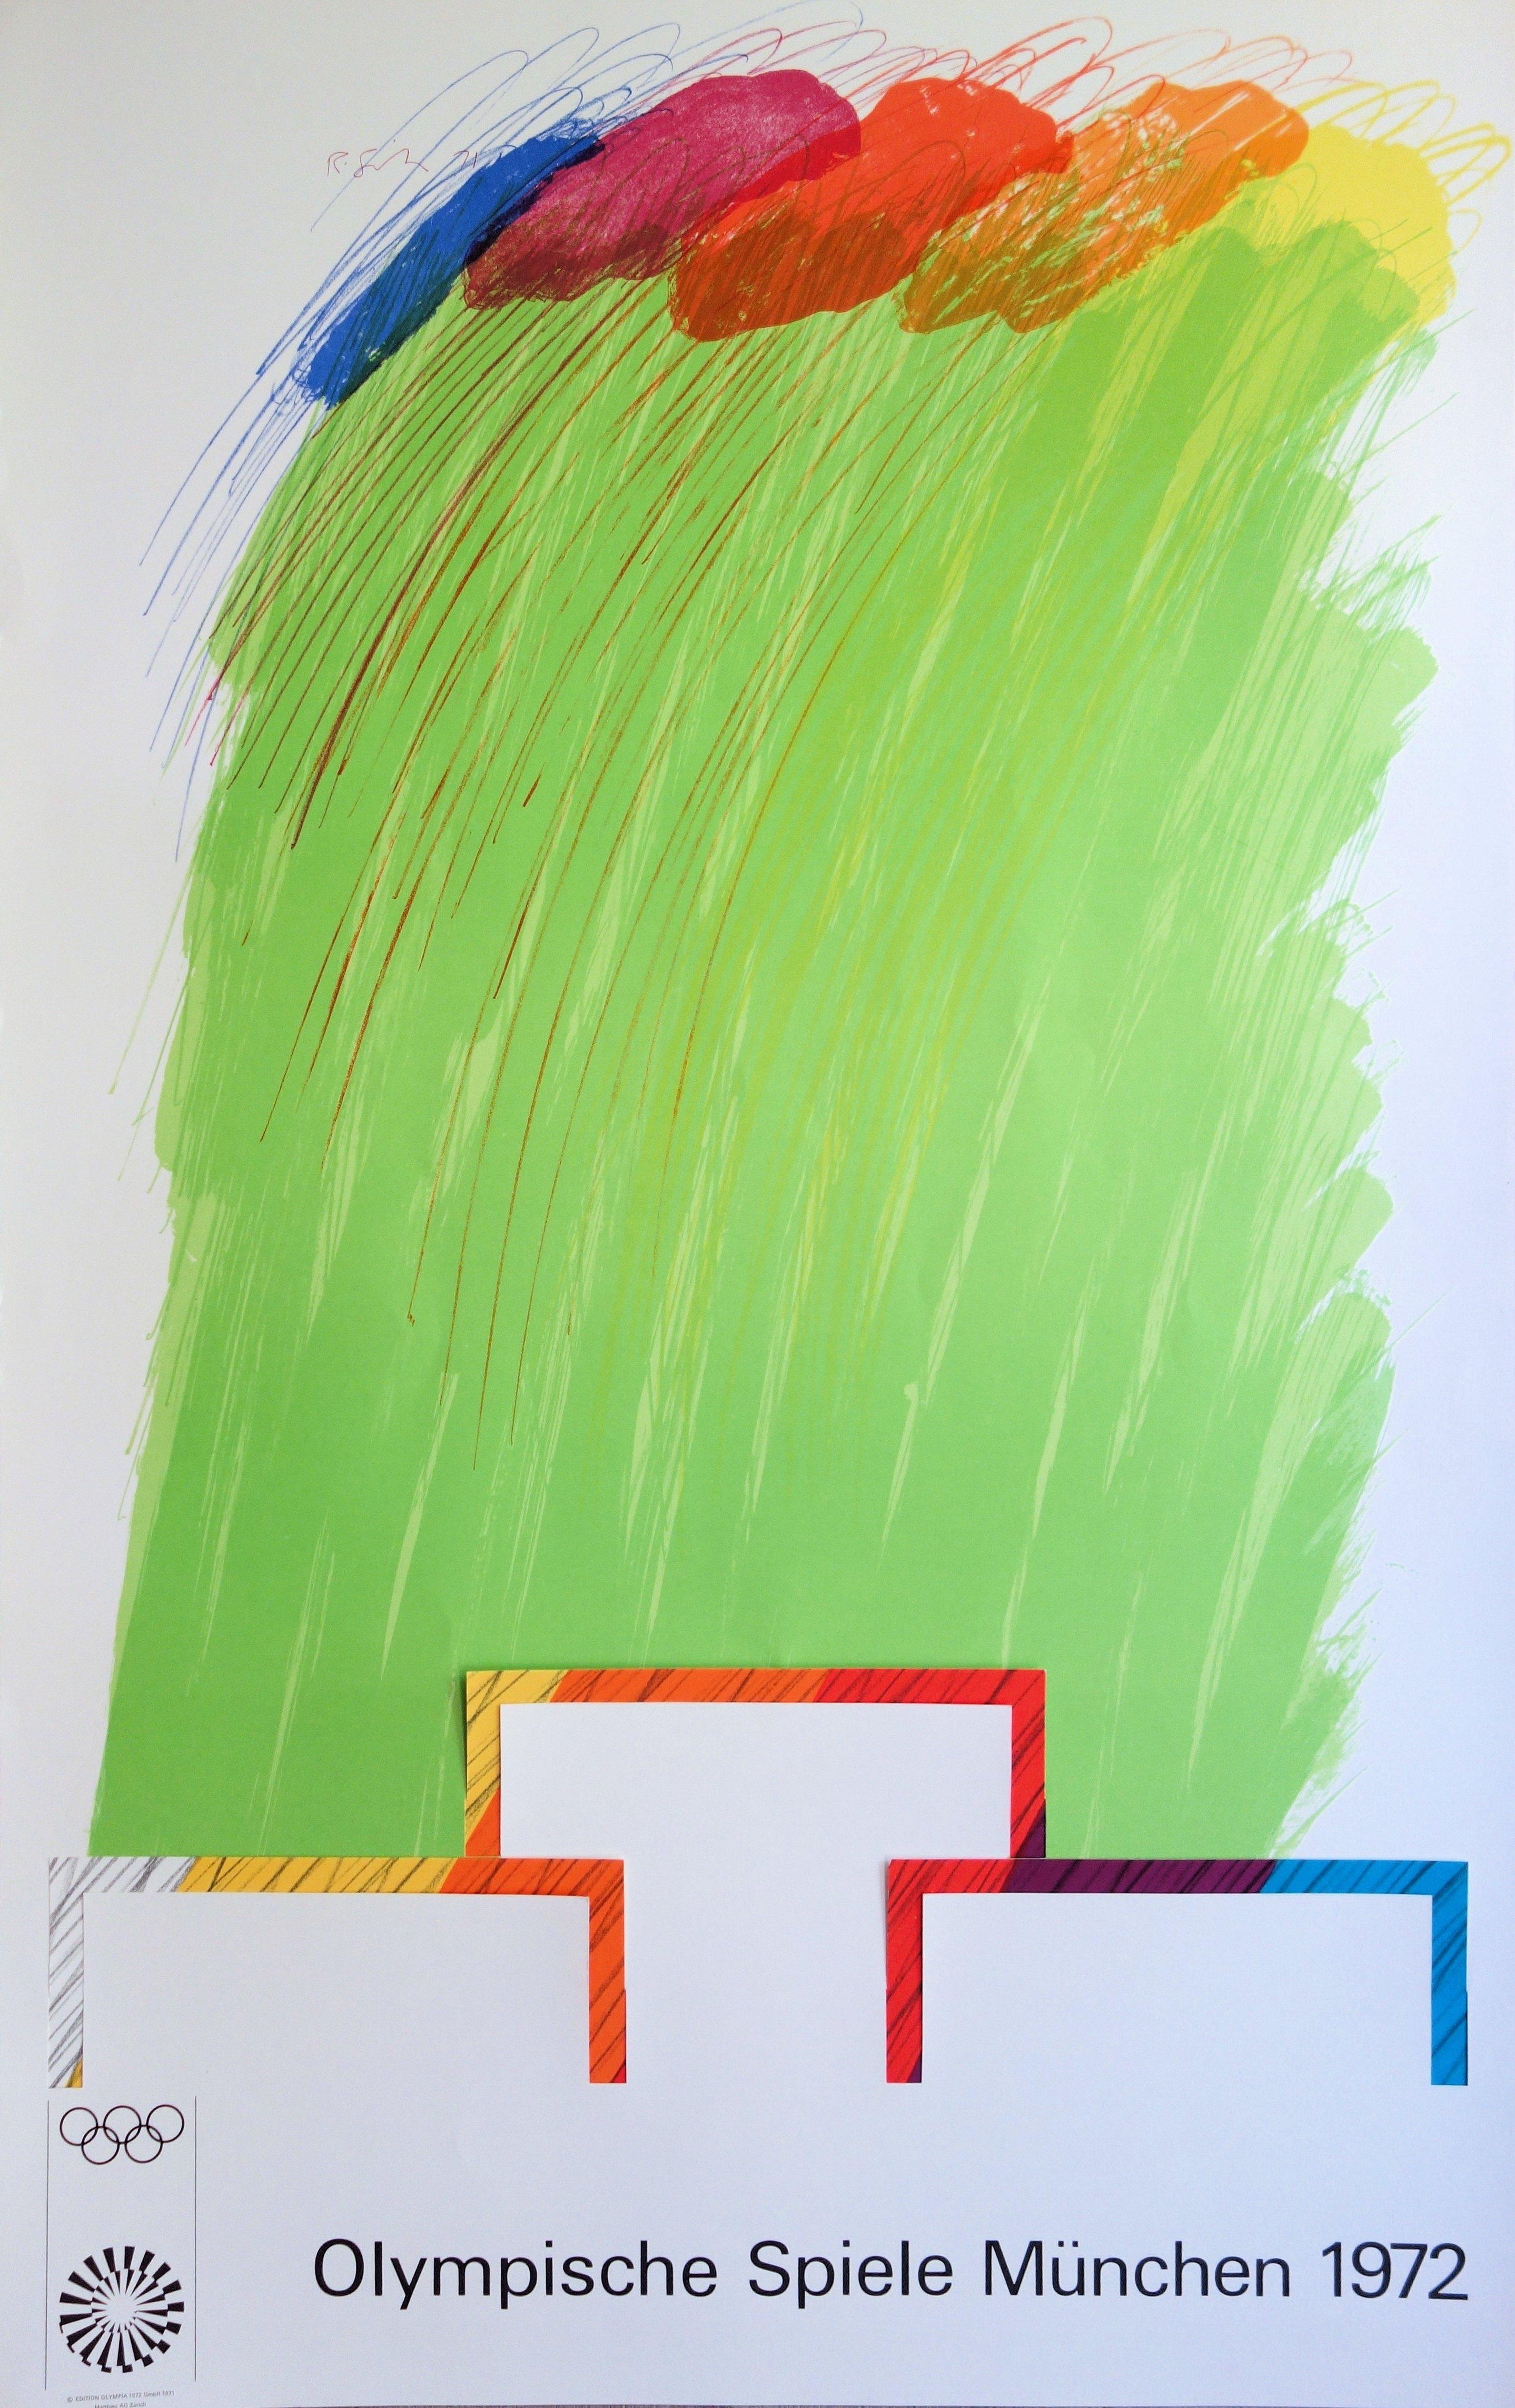 Richard Smith Abstract Print - Colors on Podium - Lithograph (Olympic Games Munich 1972)